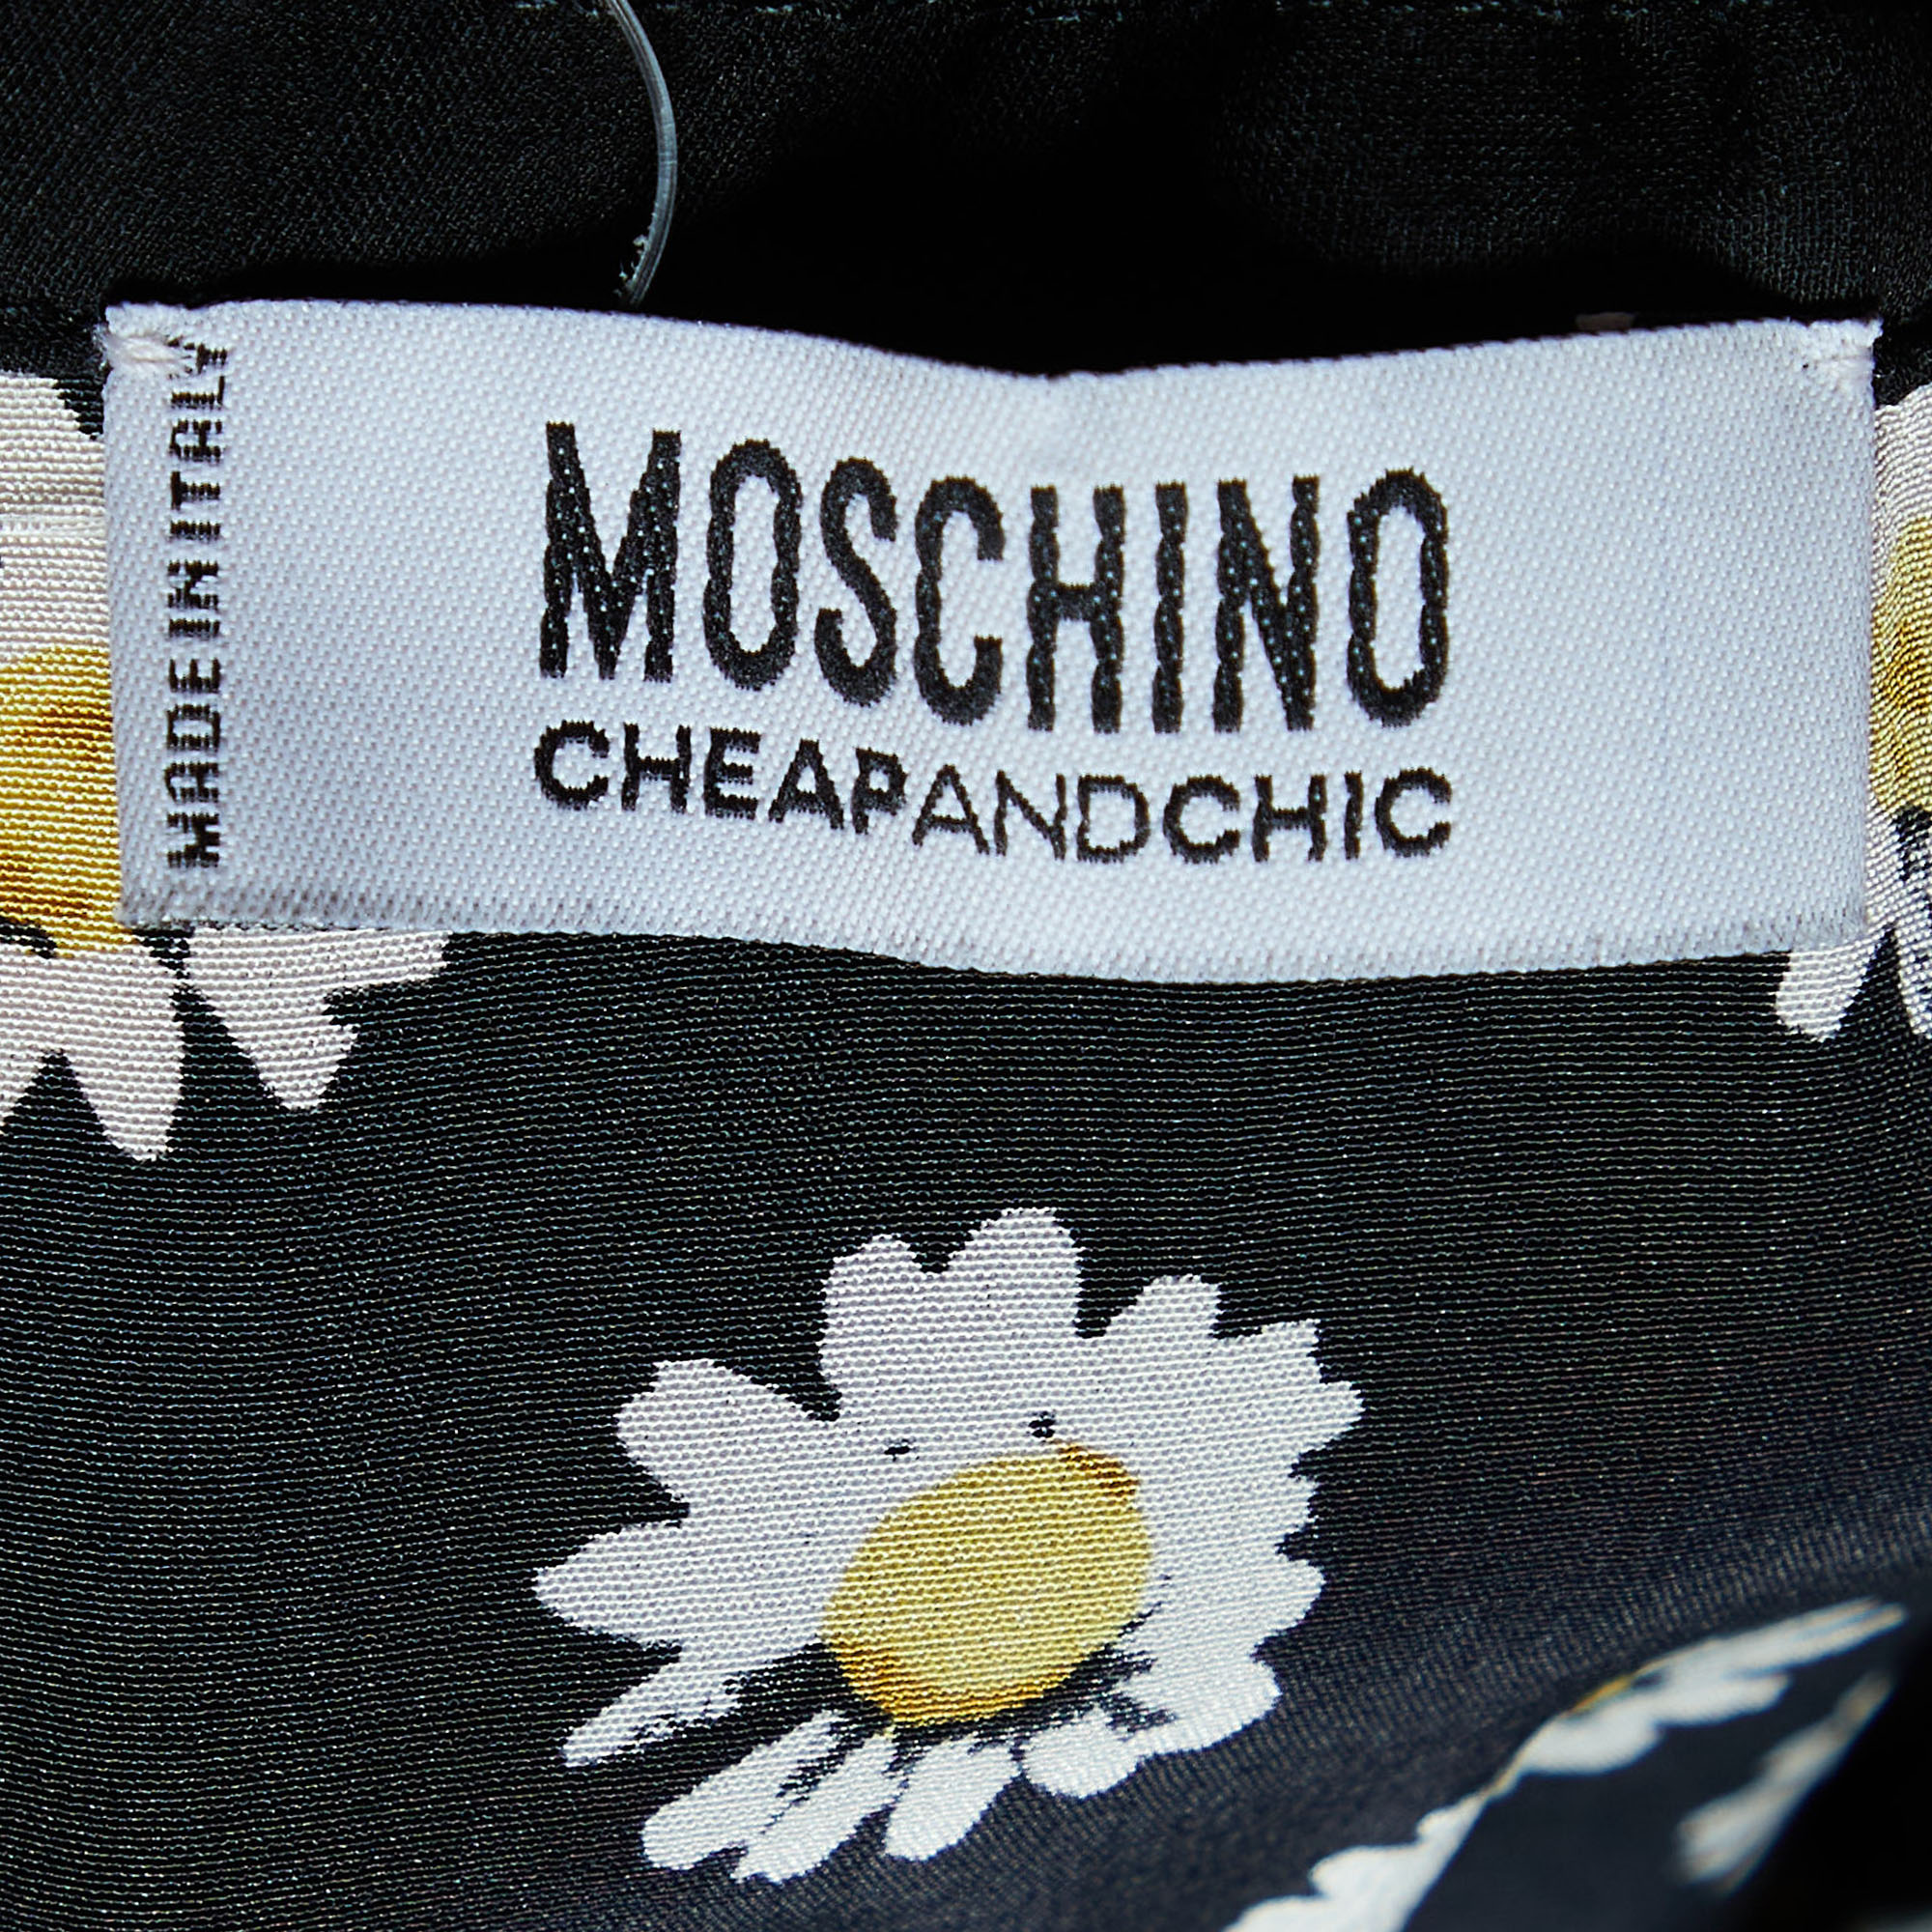 Moschino Cheap And Chic Black Floral Printed Belted Dress M